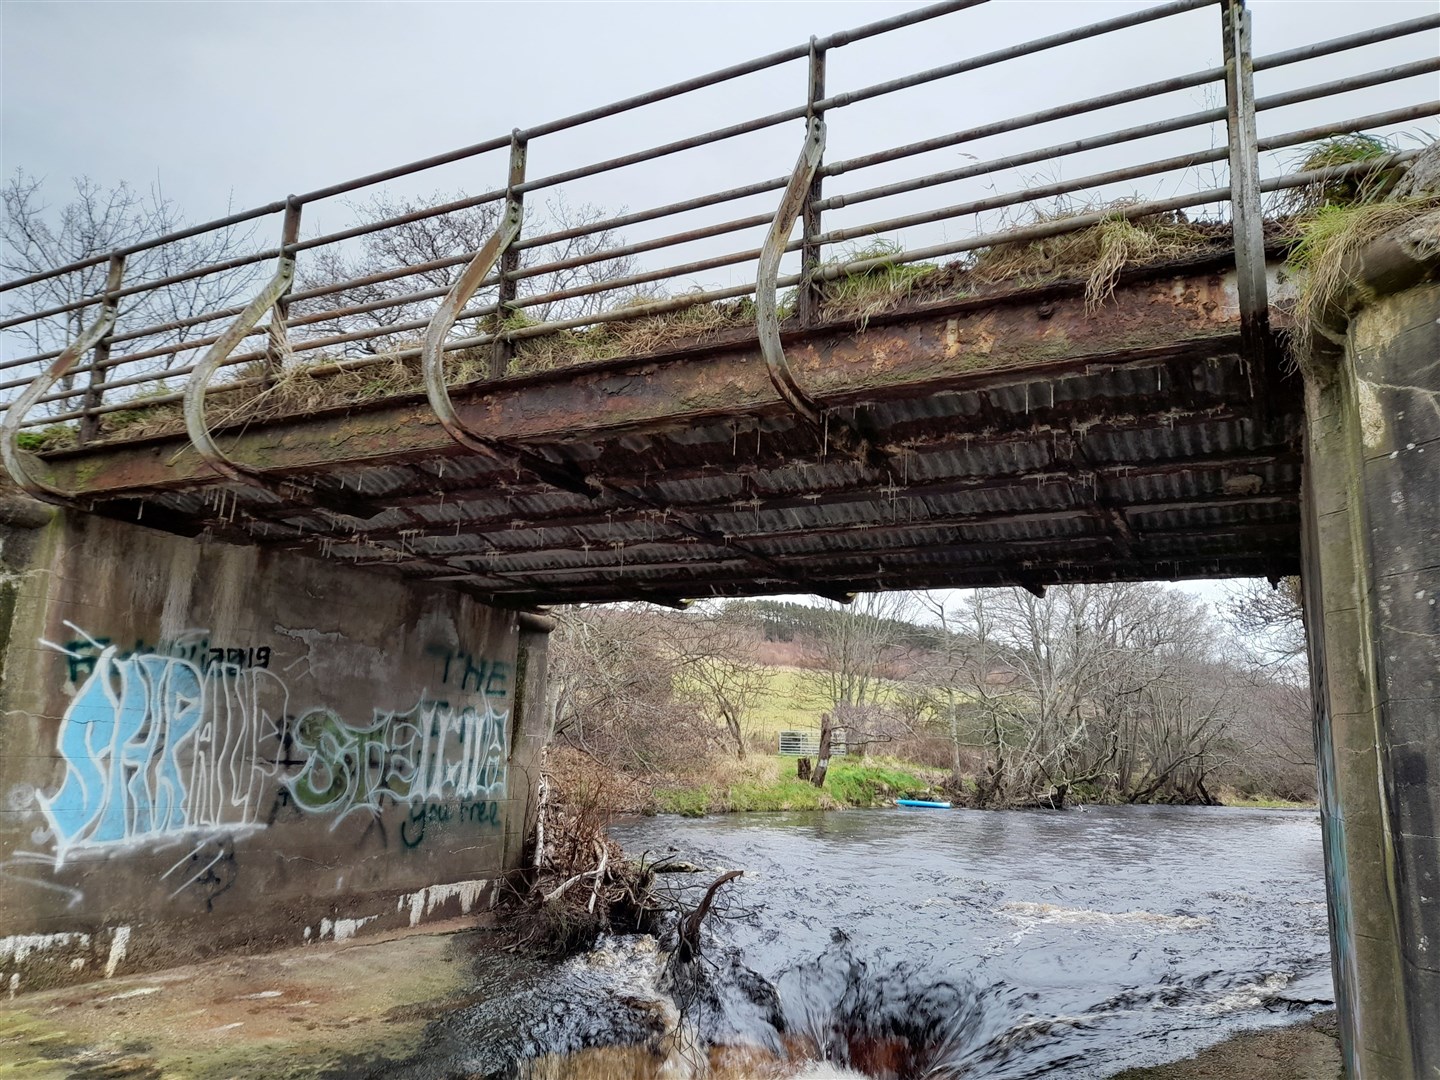 The Cloddach Bridge has been closed on public safety grounds since the start of 2022.